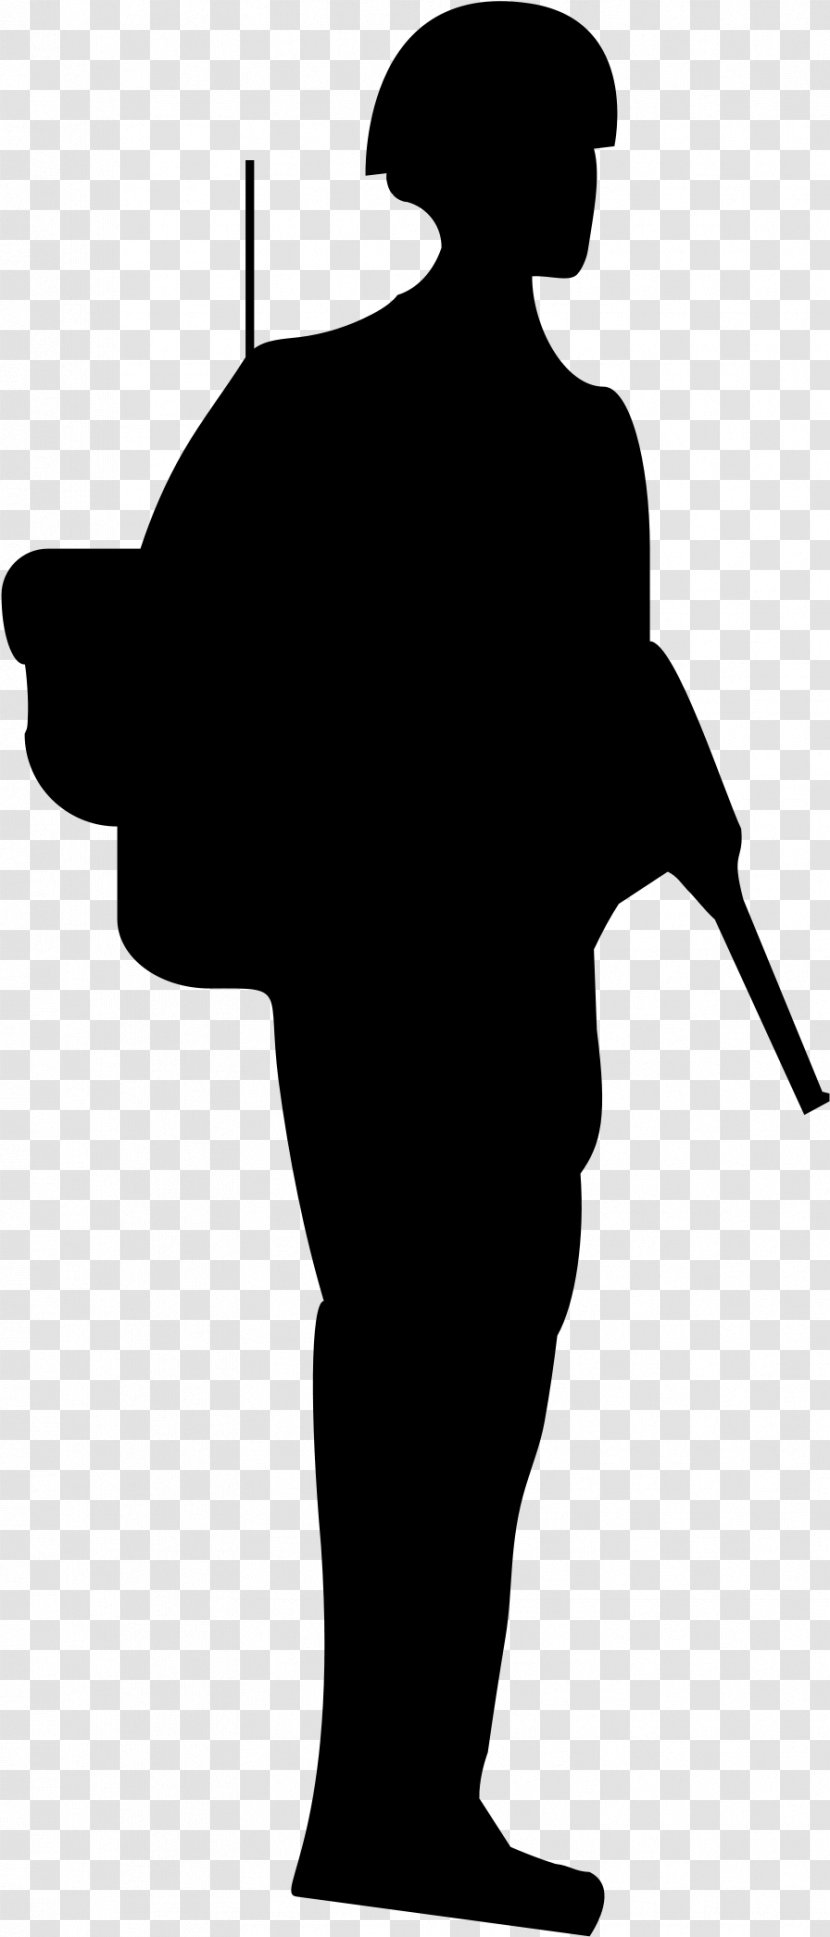 Soldier Silhouette - Blackandwhite - Salute Transparent PNG